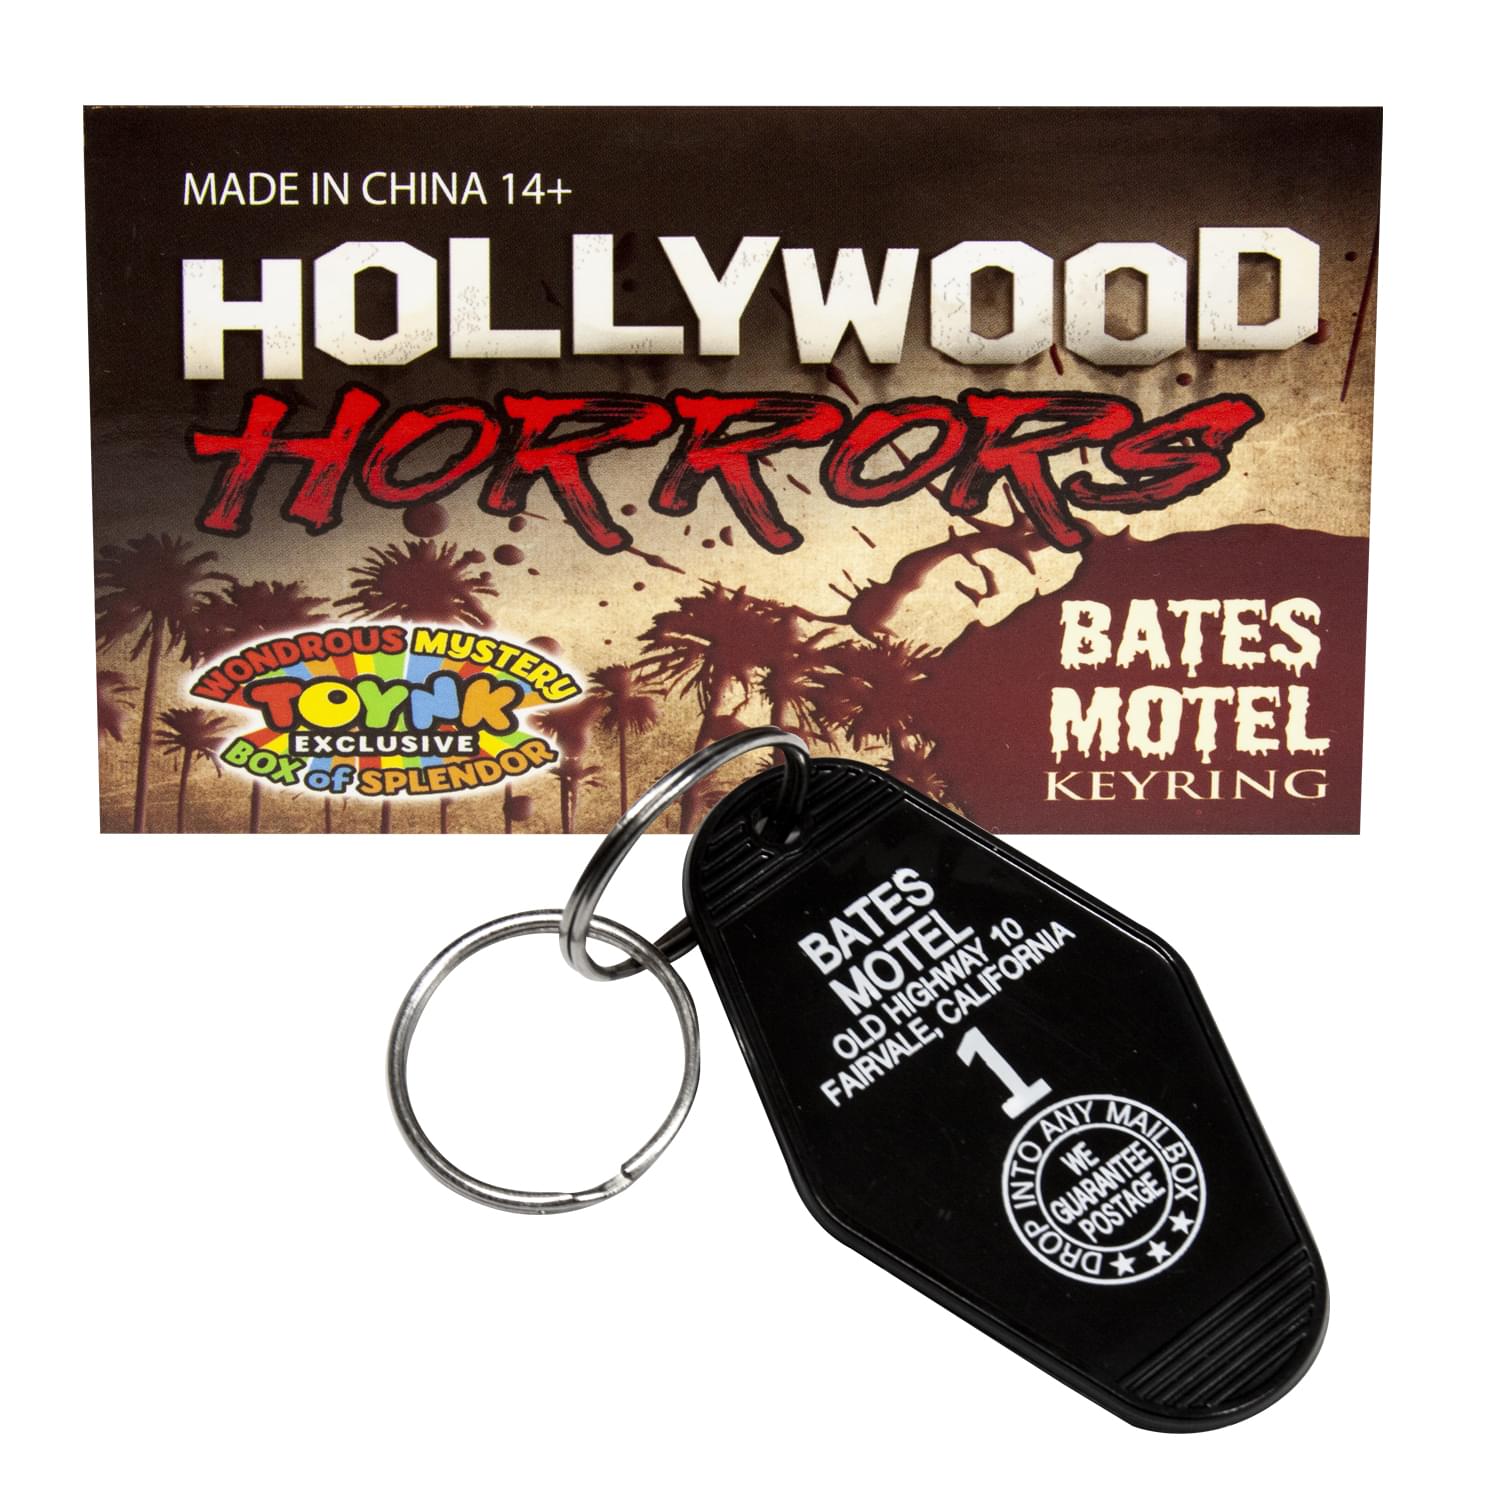 Bates Motel Keychain | Key Tag From The Movie Psycho | Horror Movie Collectible